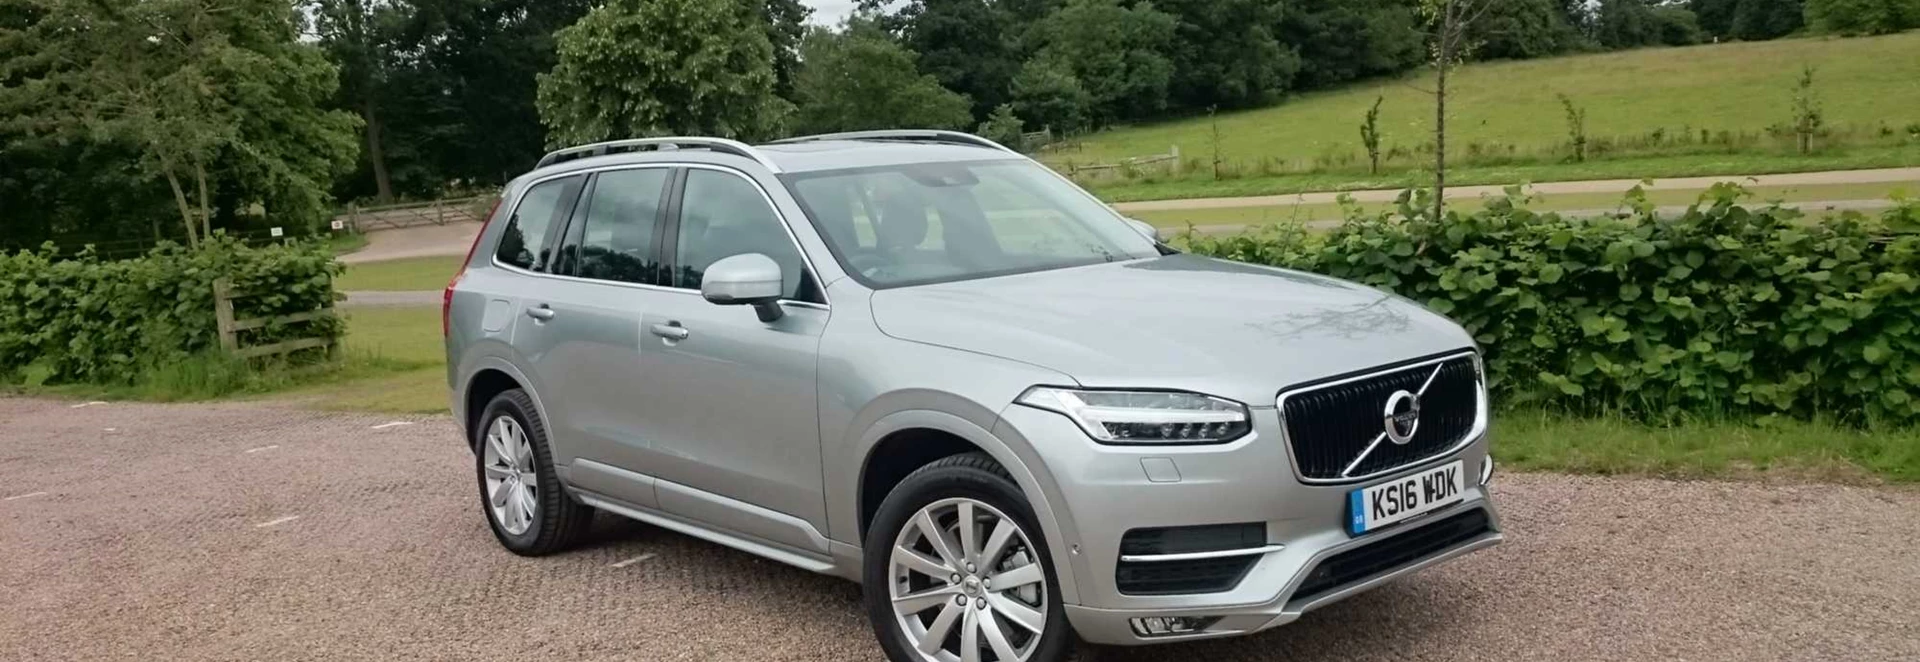 Volvo XC90 D5 AWD Power Pulse Momentum SUV review 